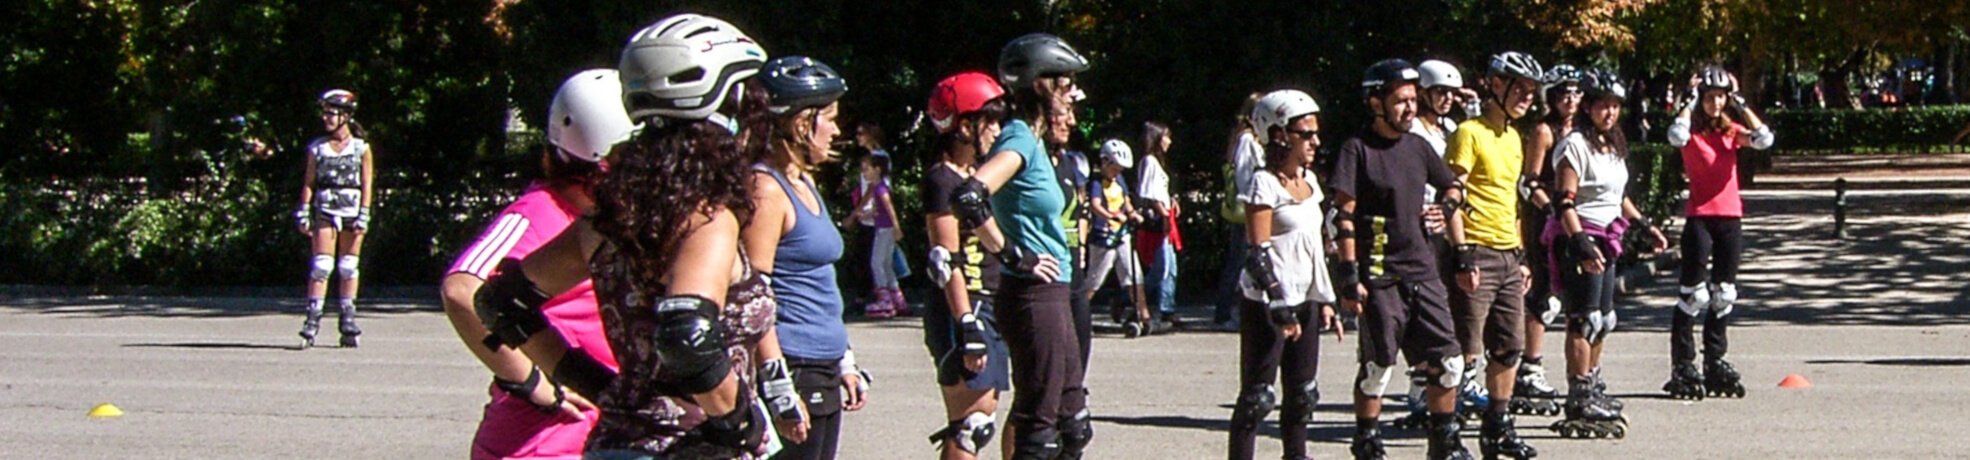 Skate & Scooter Protective Clothing